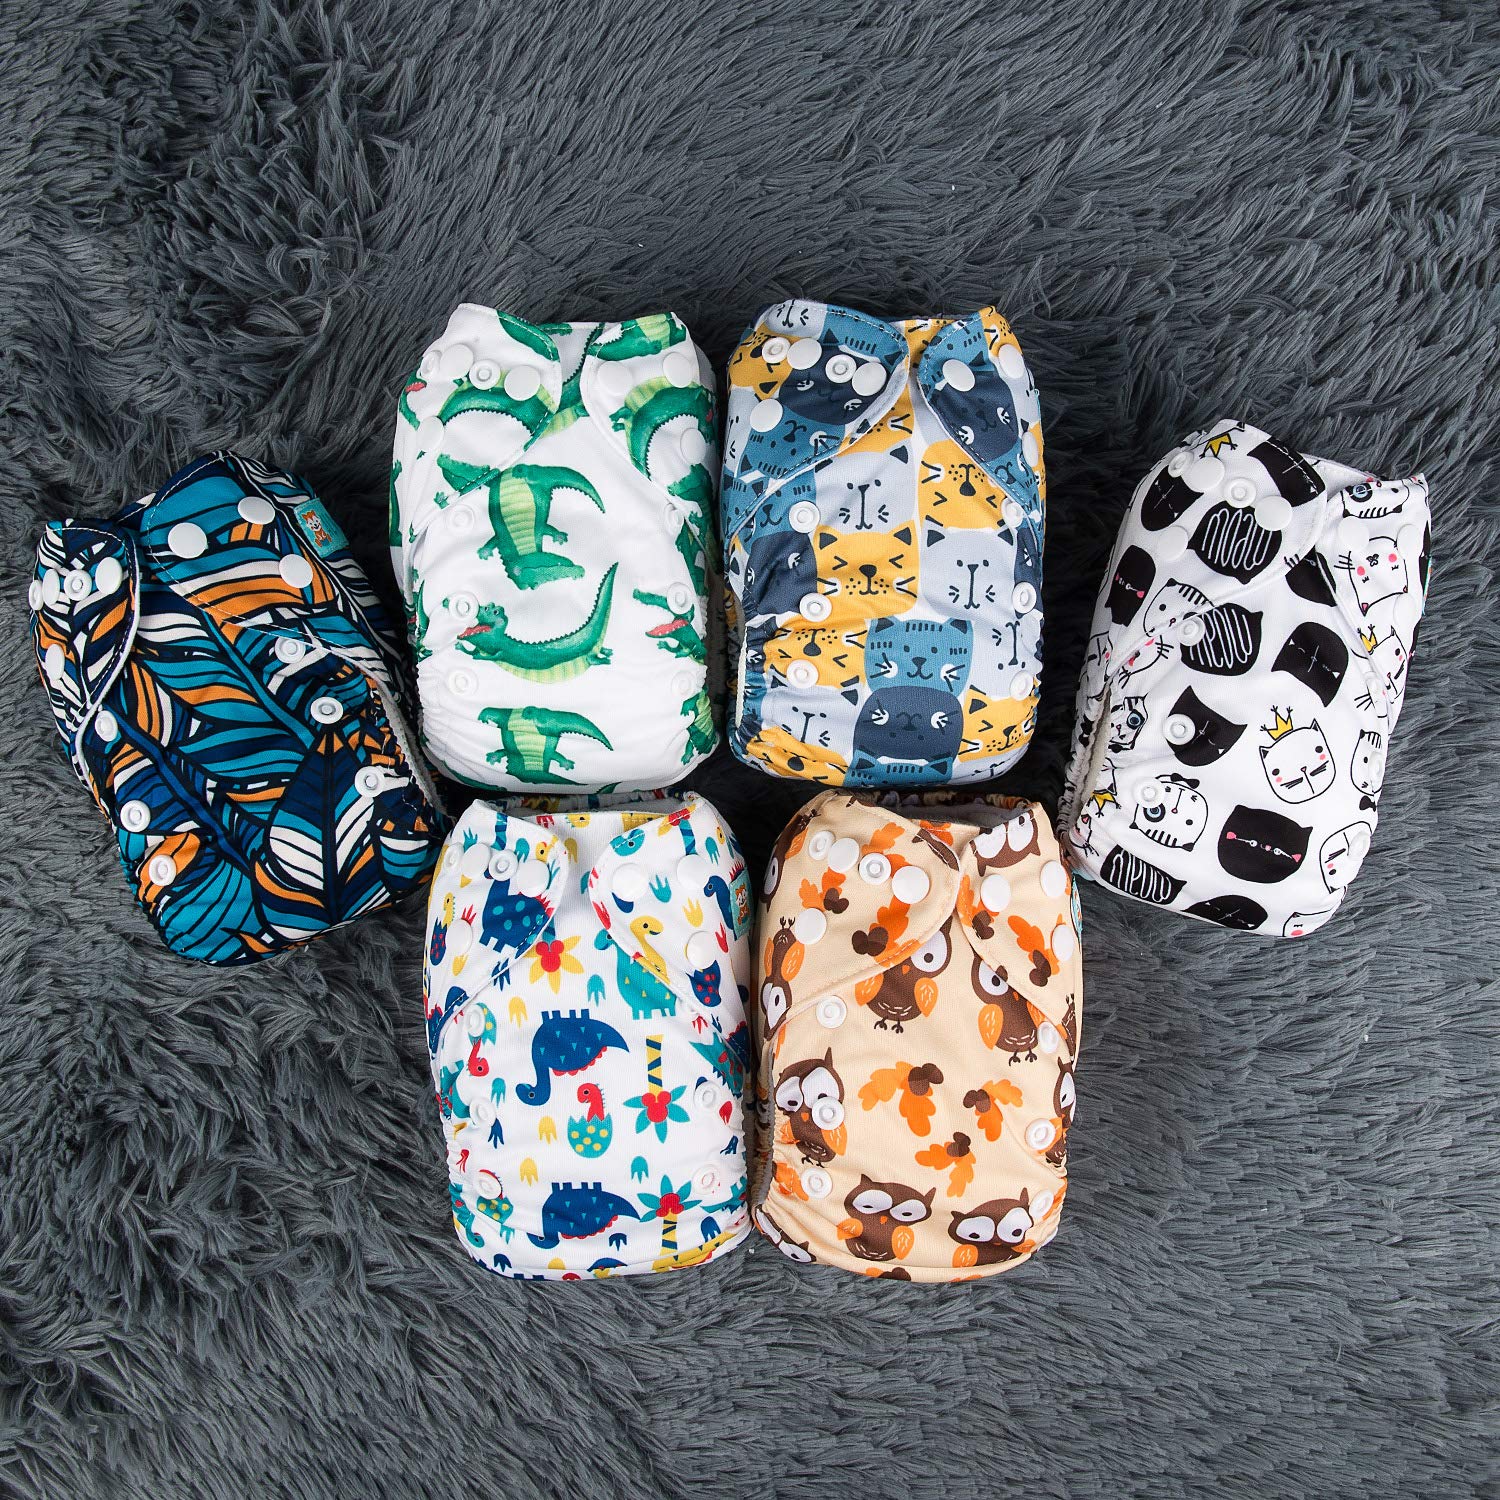 ALVABABY Pocket Newborn for Less Than 12pounds Baby Snaps Cloth Diapers Nappy 6pcs with 12 Inserts 6SVB10